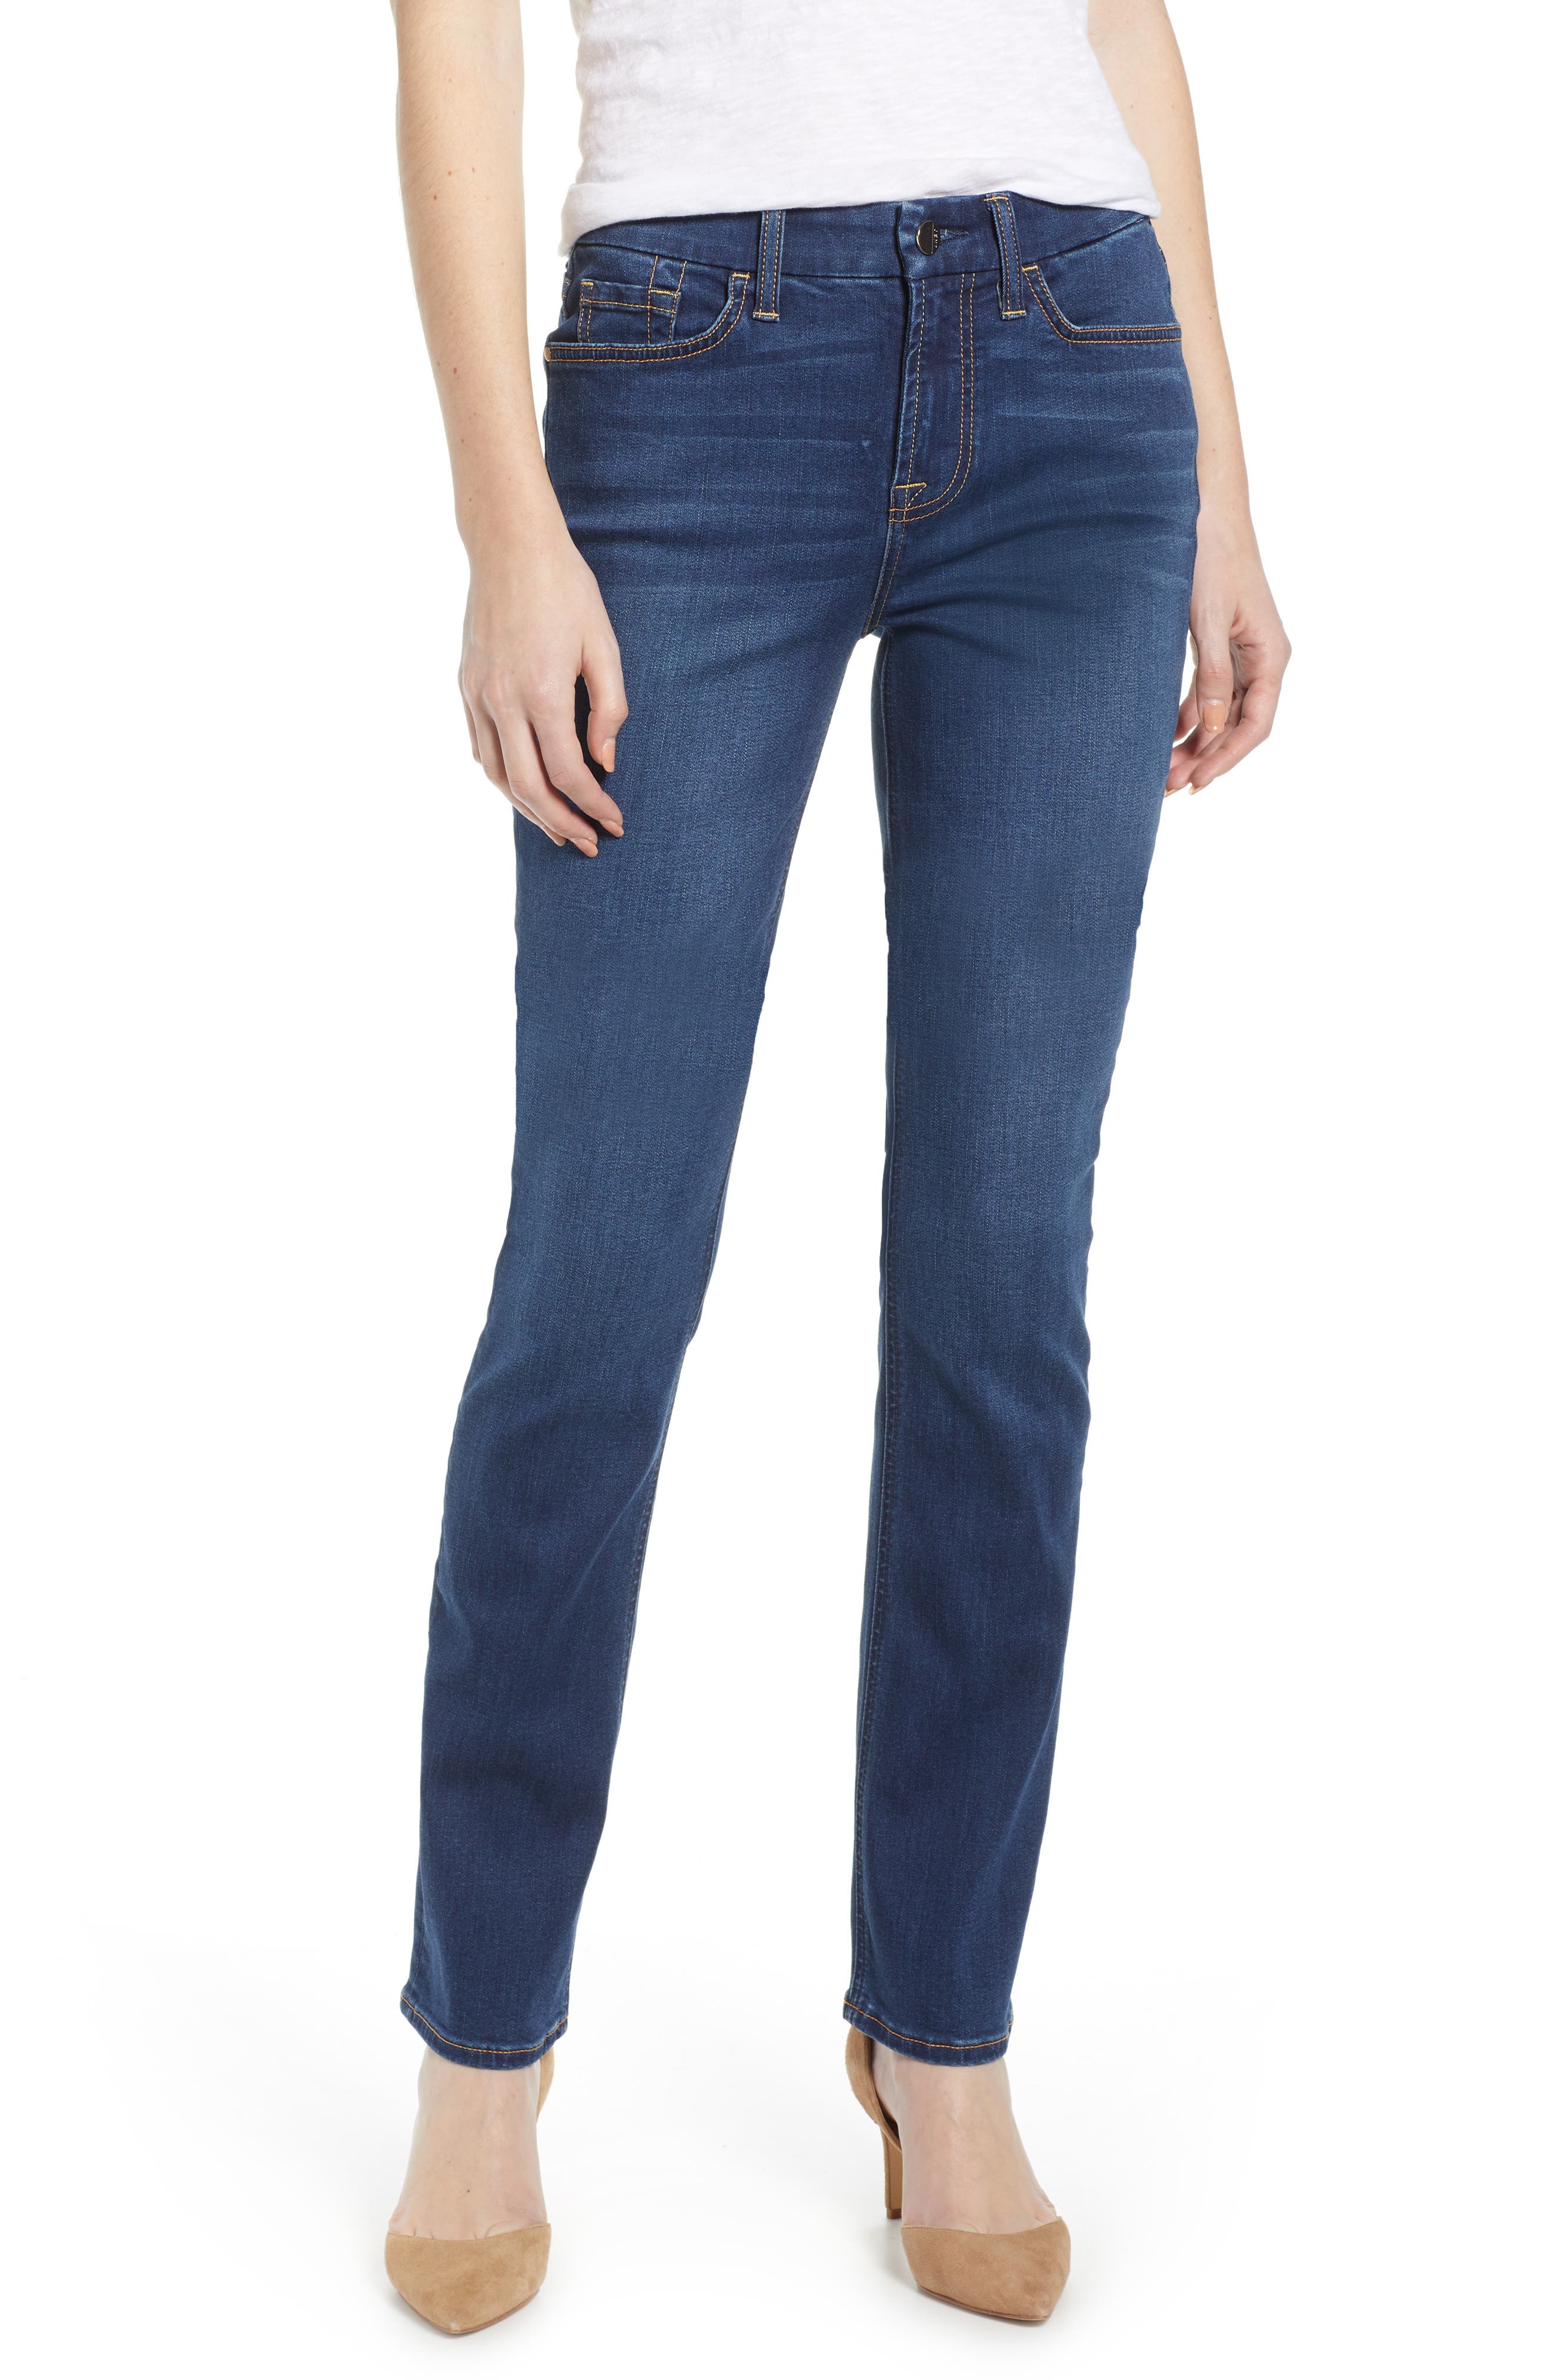 nordstrom seven for all mankind